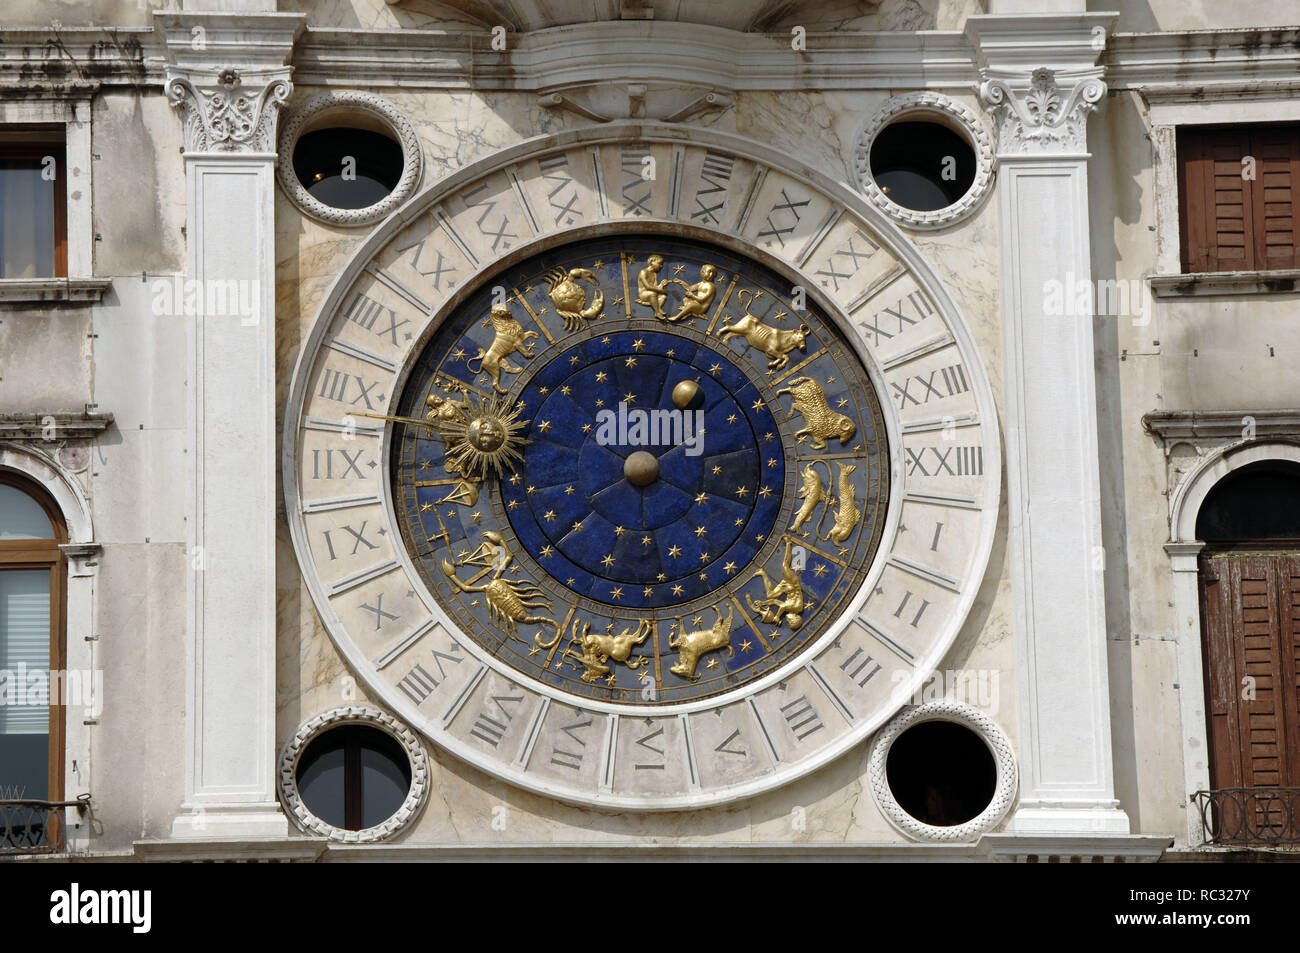 Astronomical clock in the Clock Tower of St. Mark's Square. 15th century. Venice. Italy. Stock Photo